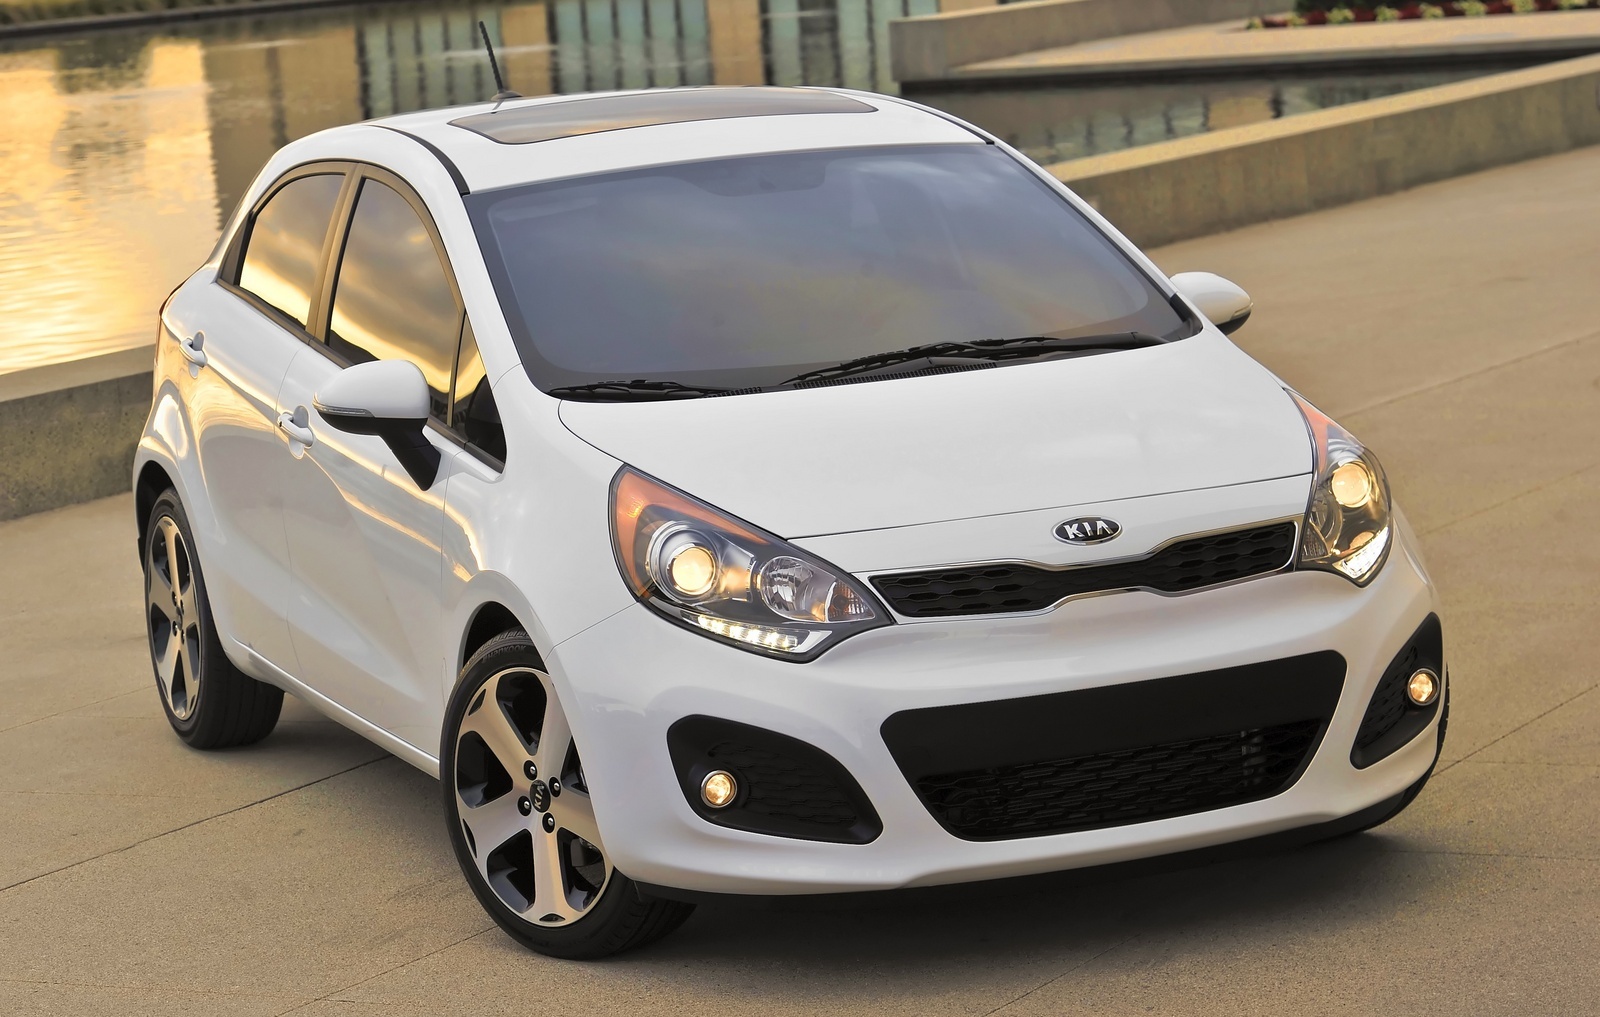 Kia Pride 2015: Review, Amazing Pictures and Images - Look at the car